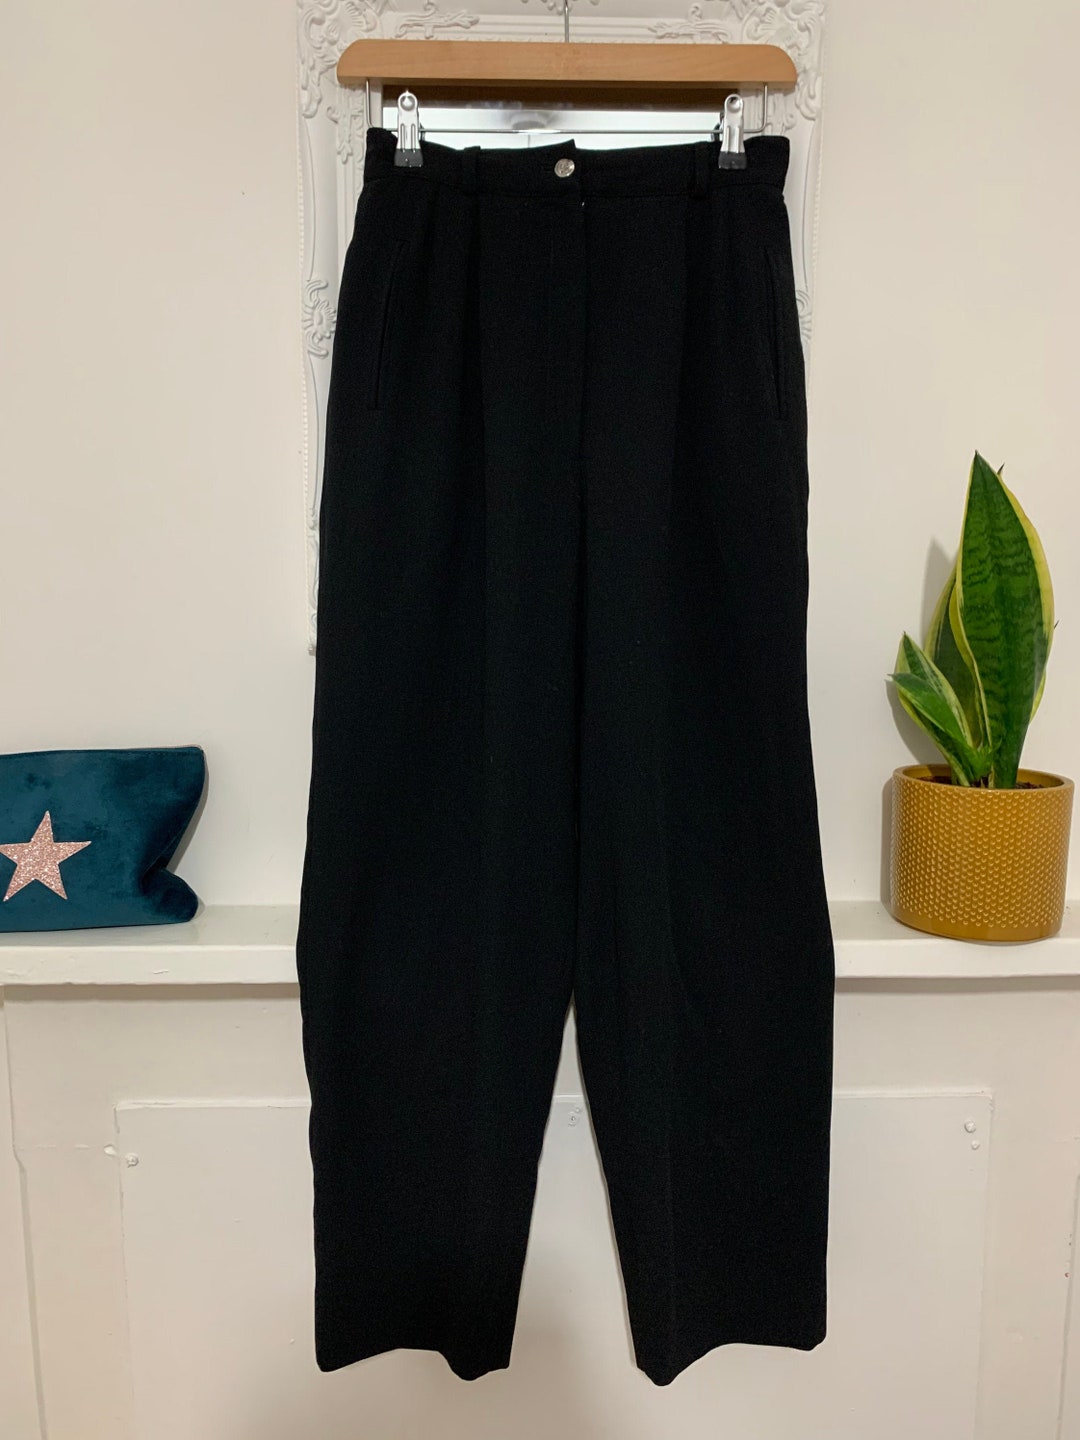 Vintage Black Trousers High Waisted Ladies Pleated Trousers - Etsy UK